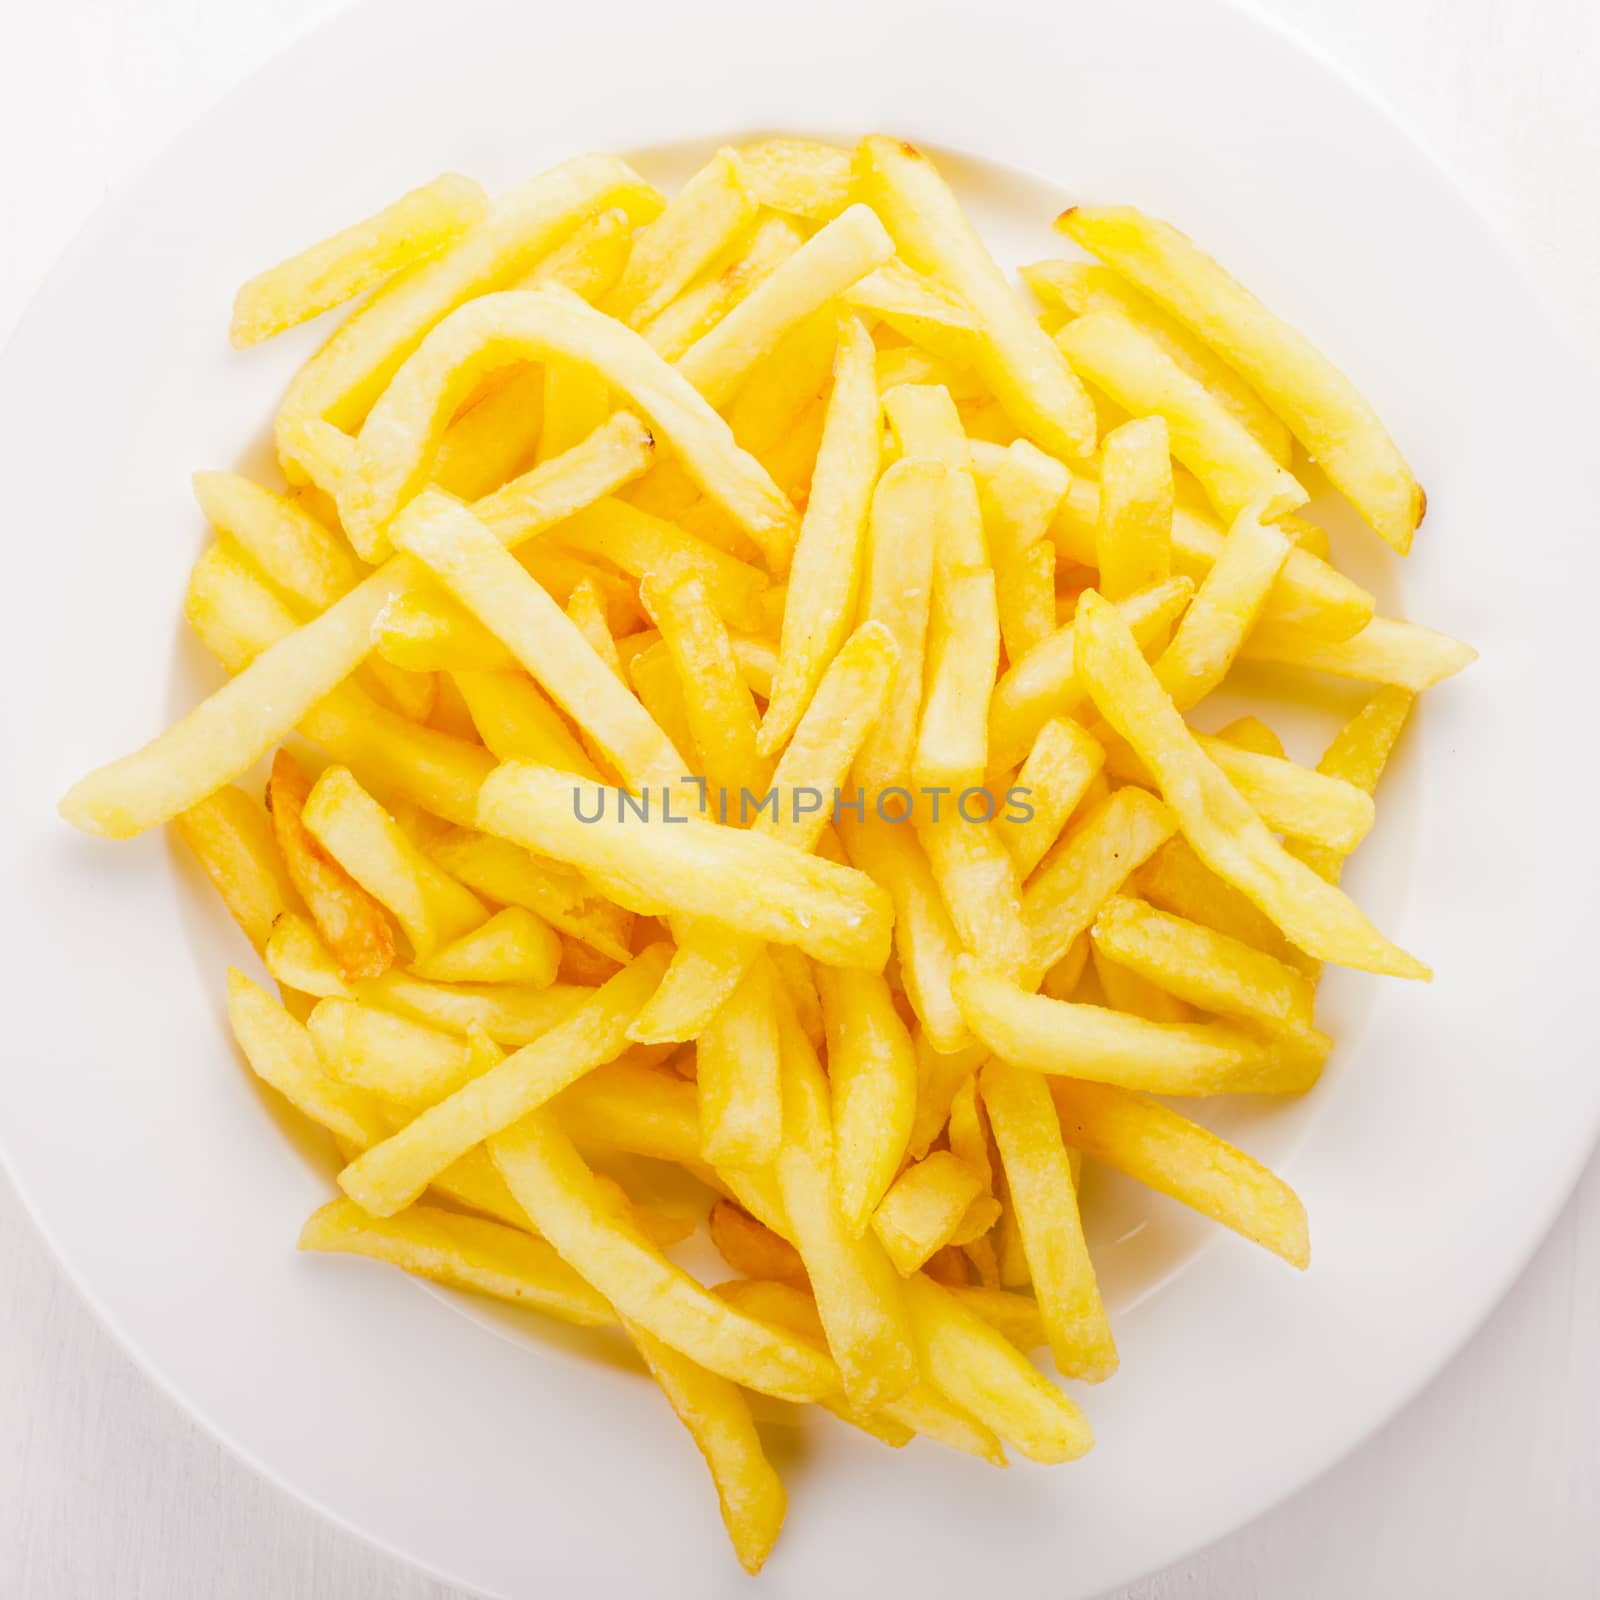 Fried potato on a white plate on the table